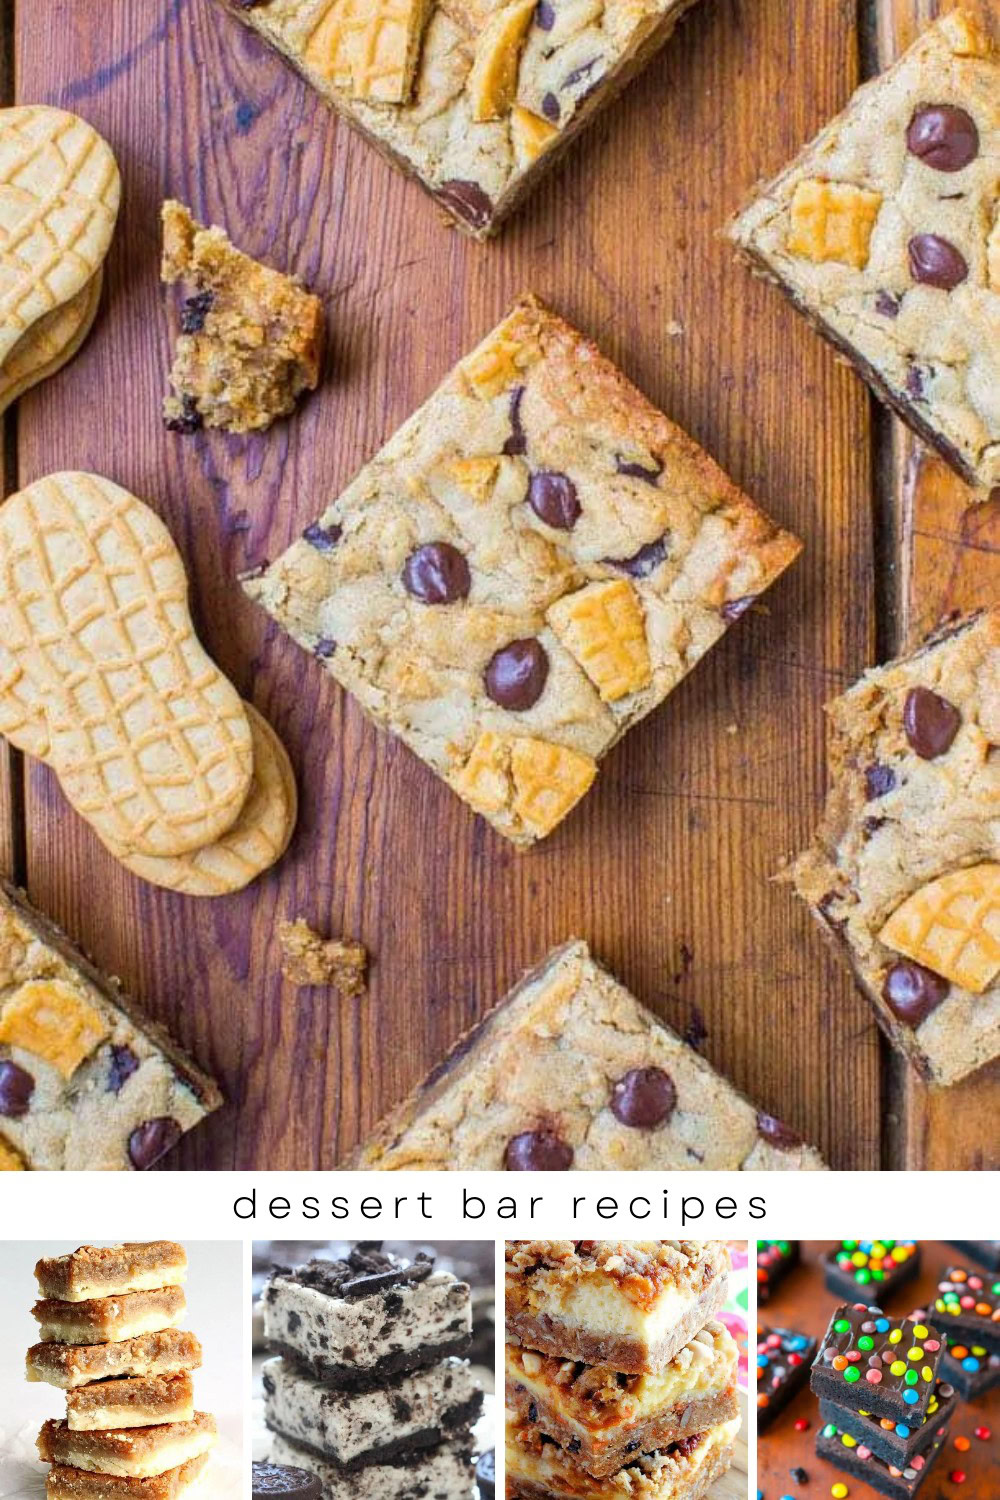 Need a sweet fix? These dessert bar recipes are so tasty, you won’t want to wait! From chewy caramel bars to luscious lemon bars, these treats are a must-try. Don’t forget to pin this for later! #SweetTooth #BakingFun

